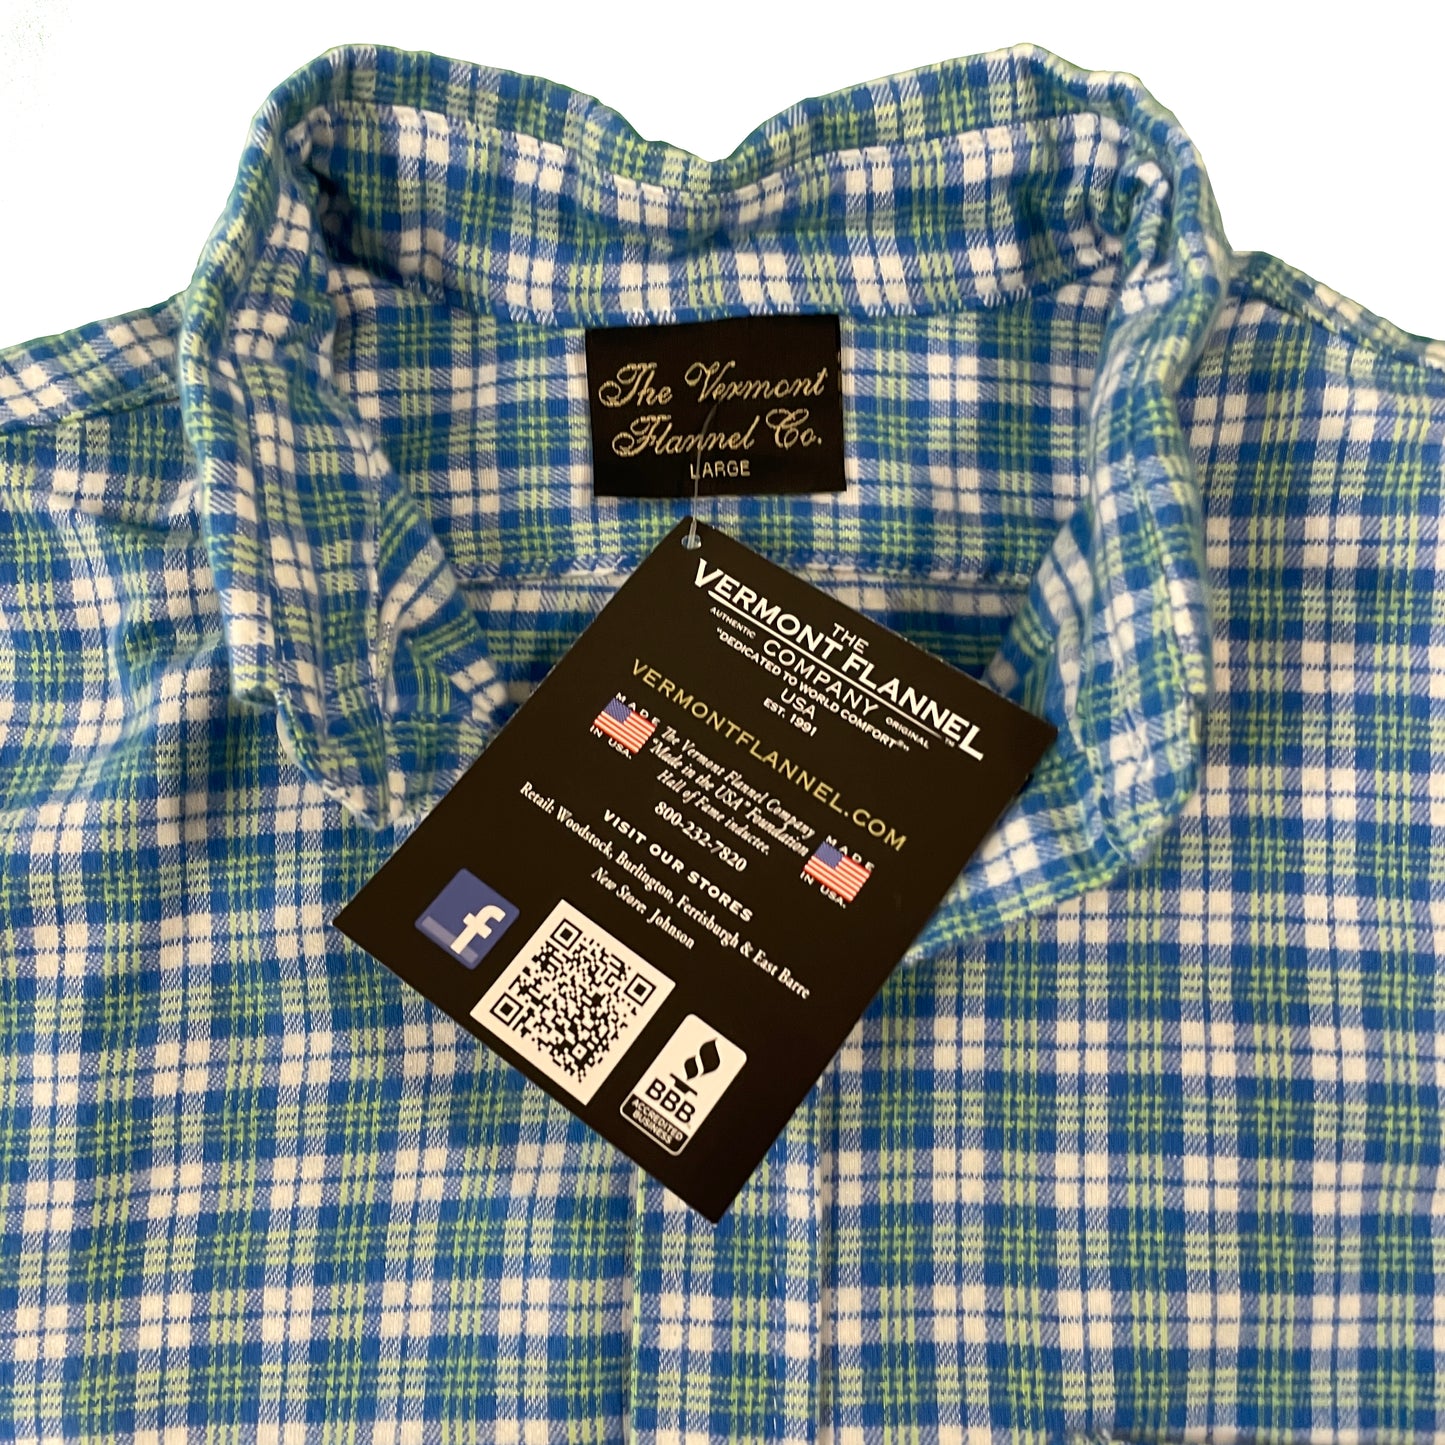 VINYL7 RECORDS VERMONT FLANNEL Fitted Short Sleeve Shirt / Blue